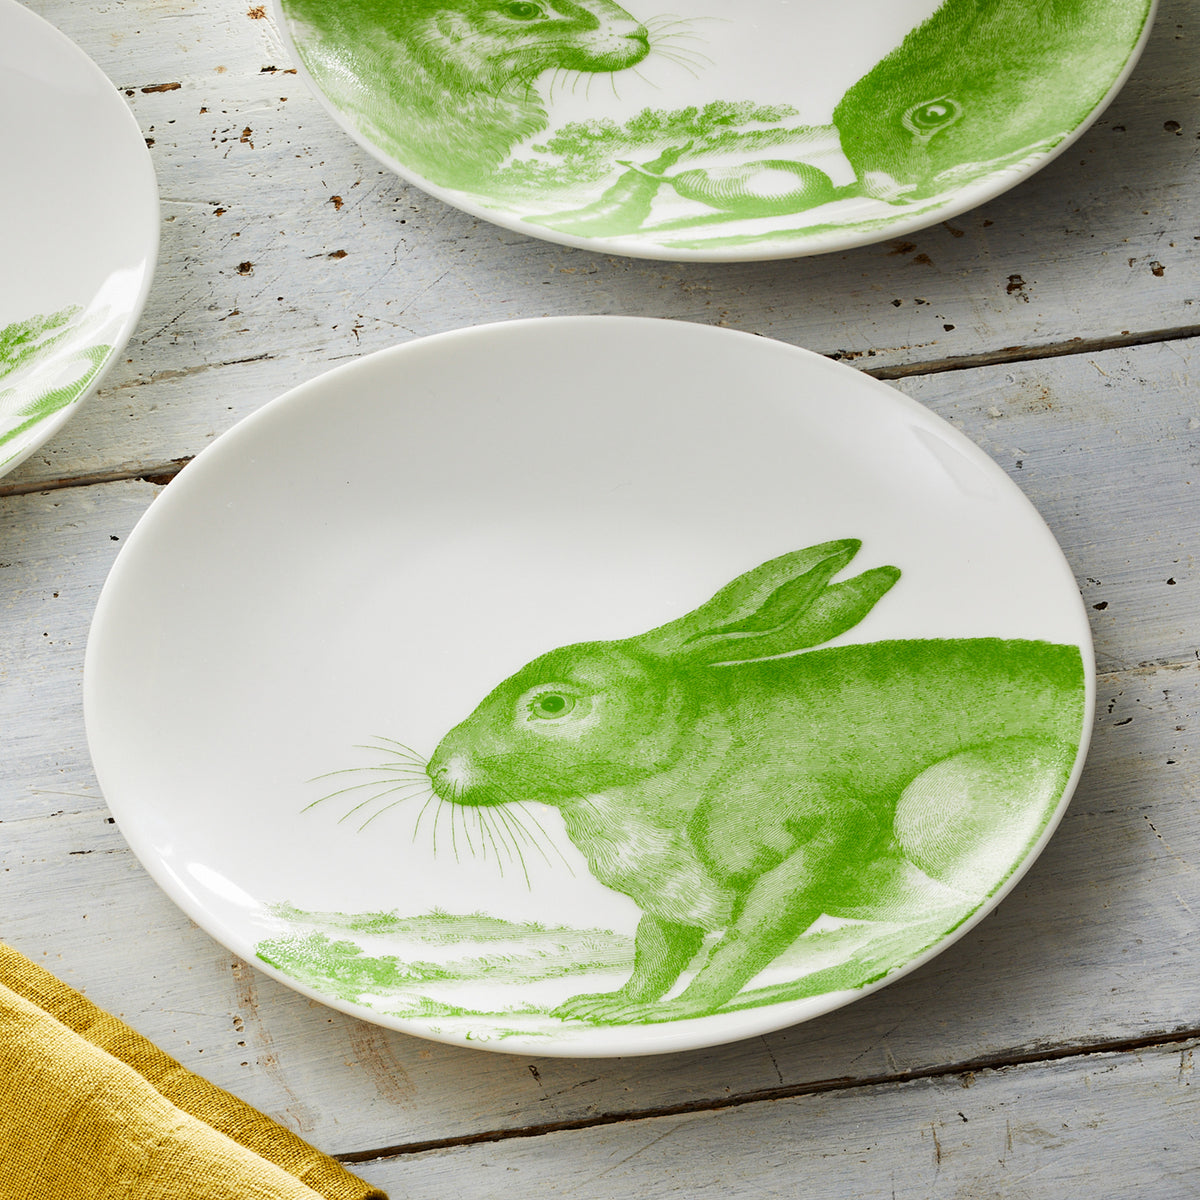 A Caskata Bunnies Verde Small Plate featuring a green illustration of a bunny scene, sitting on a light gray wooden surface with a yellow cloth nearby.